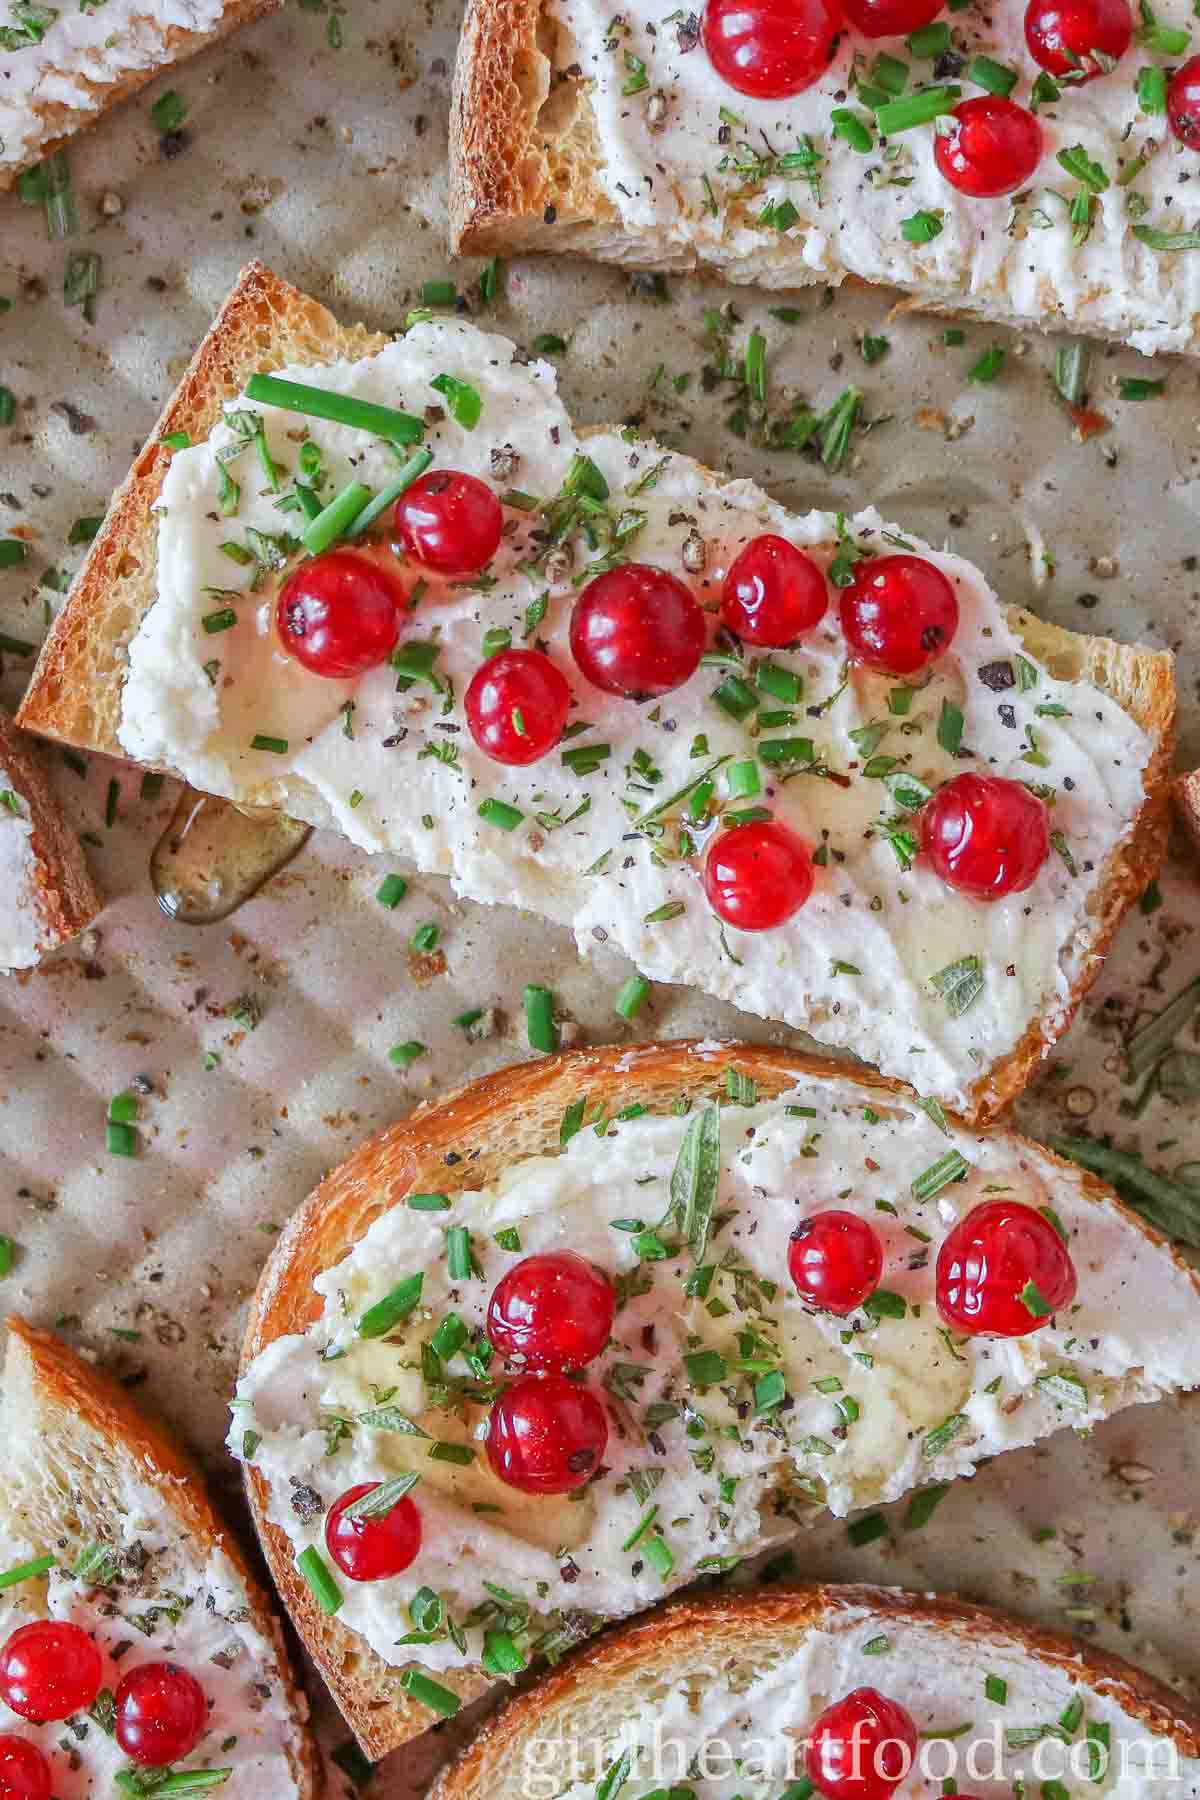 Goat cheese and red currant crostini on a sheet pan.